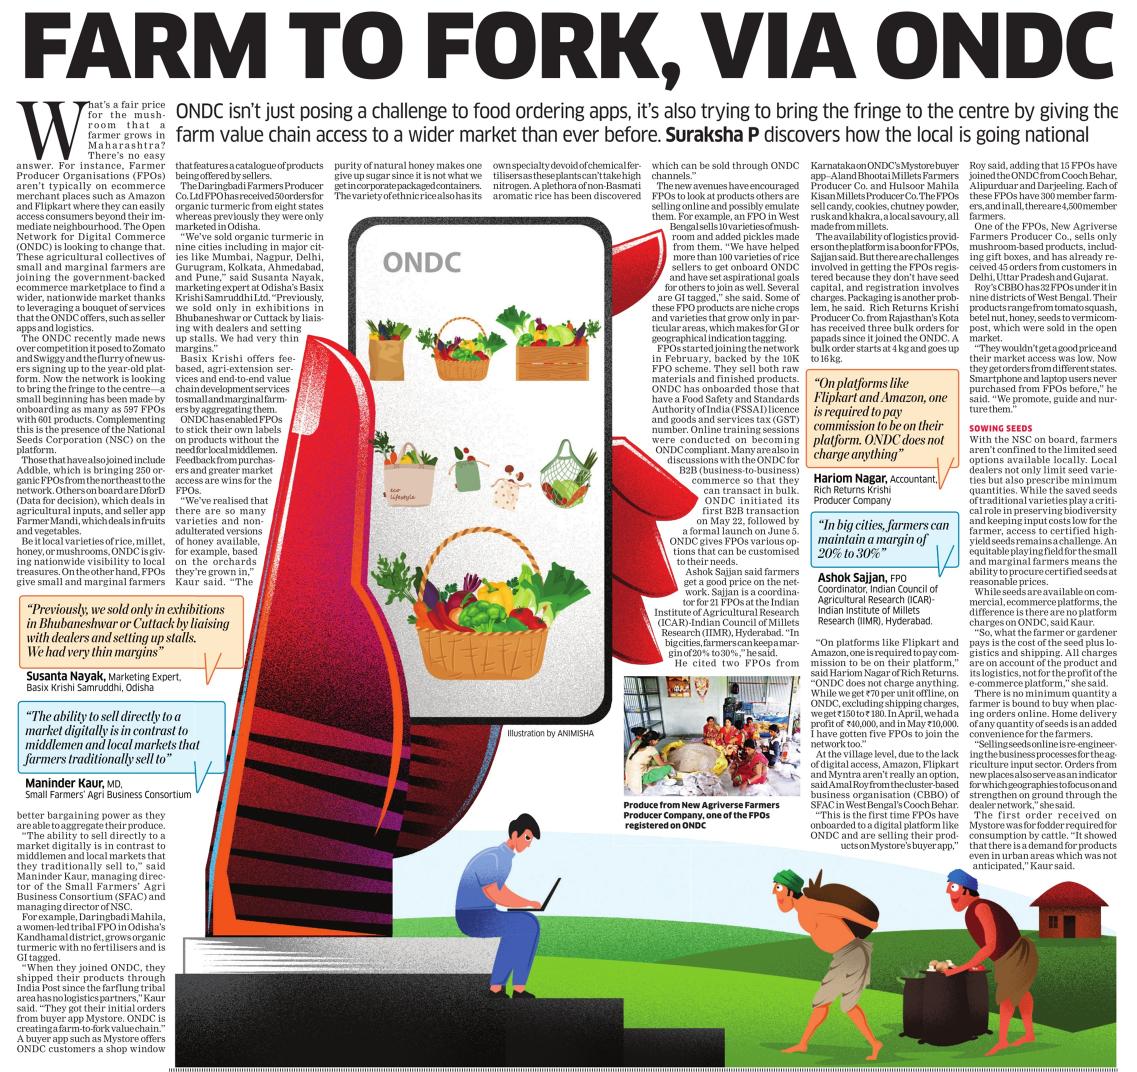 Farm to Fork: How @ONDC_Official is giving nationwide visibility to Farmer Proucer Organisations @sfacindia
@mkaurdwivedi
economictimes.indiatimes.com/tech/technolog…

 @EconomicTimes @ETtech